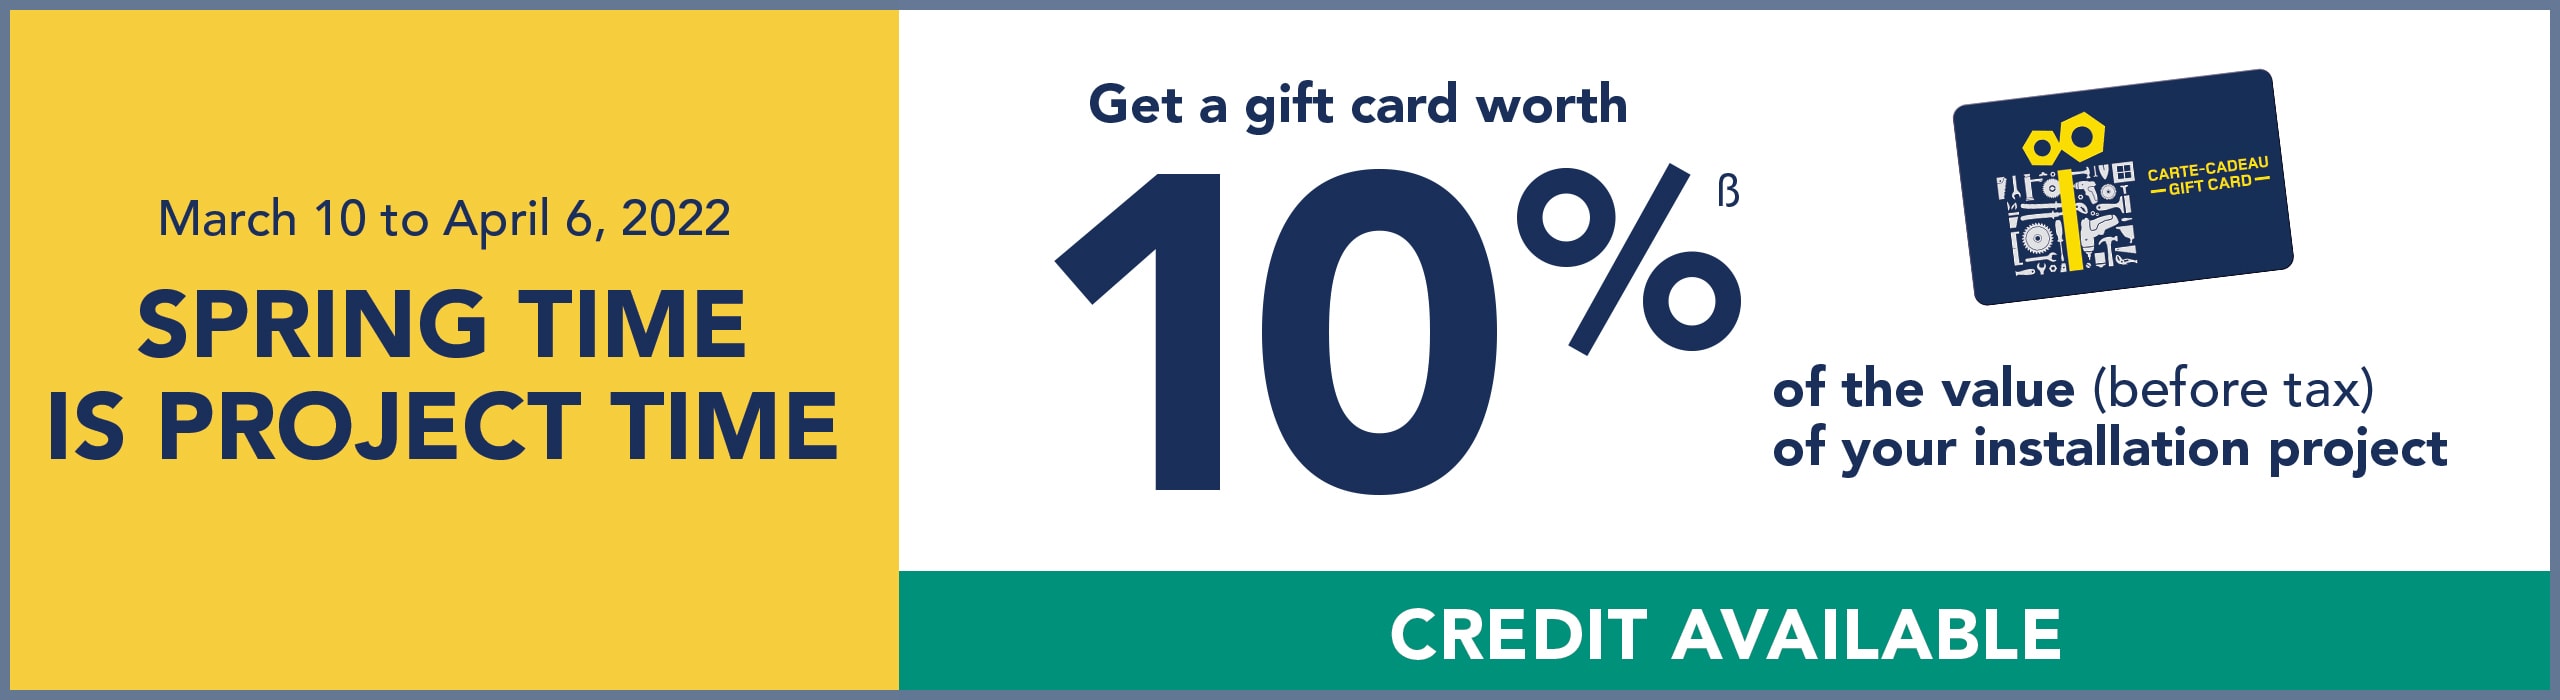 Until April 6th, get a gift card worth 10% of the value (before tax) of your installation project